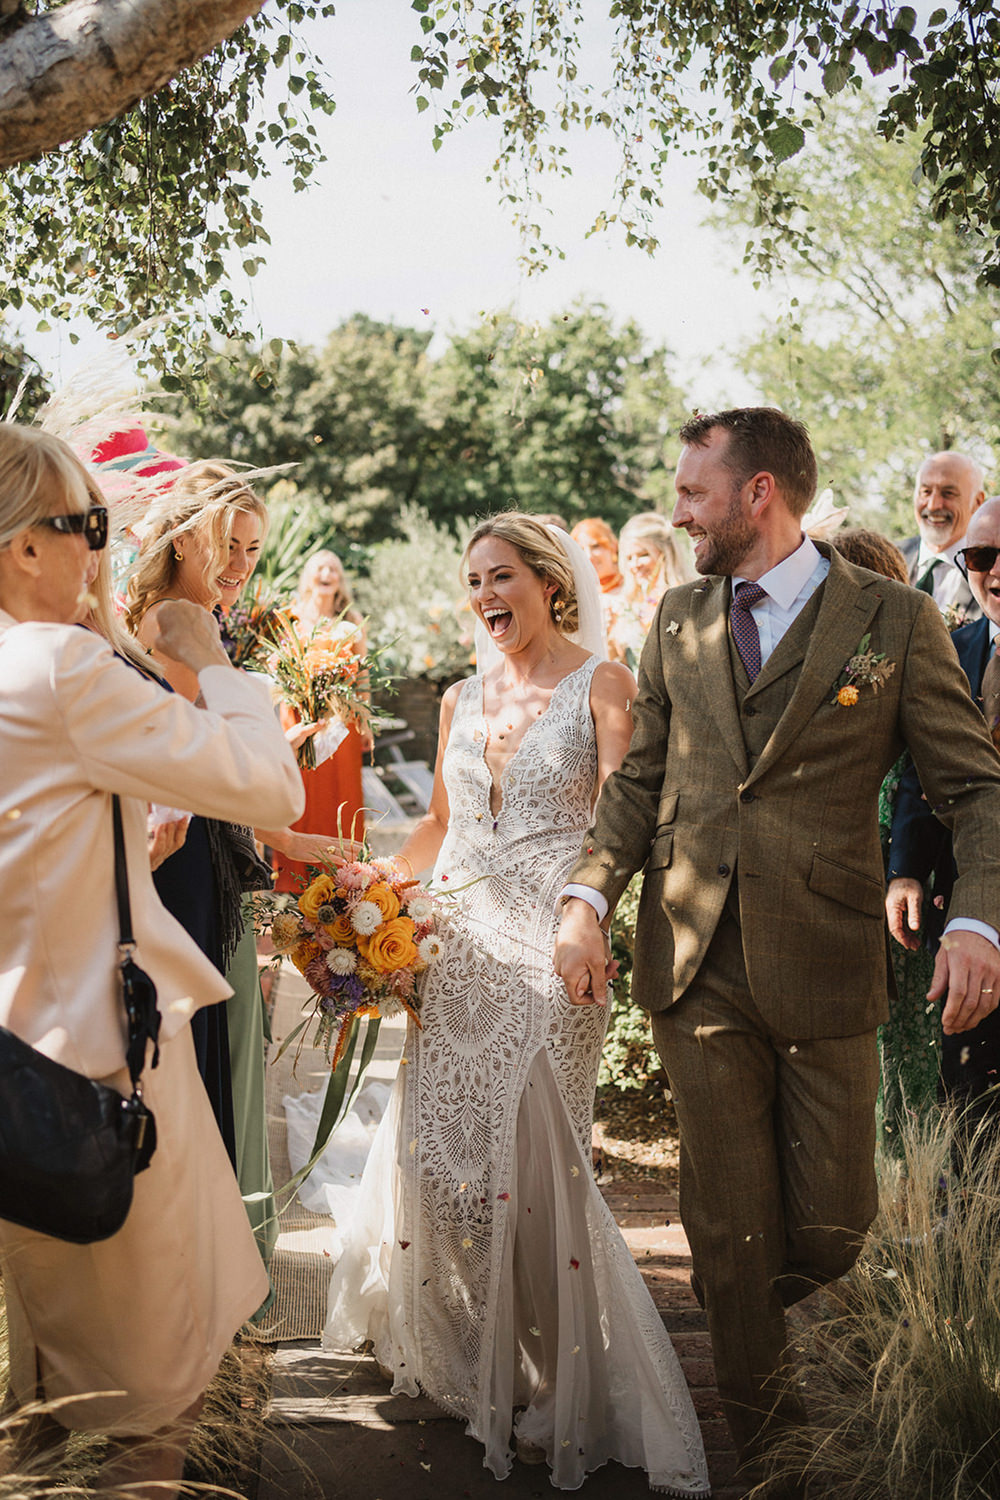 relaxed documentary wedding photographer in suffolk confetti throw over bride and groom